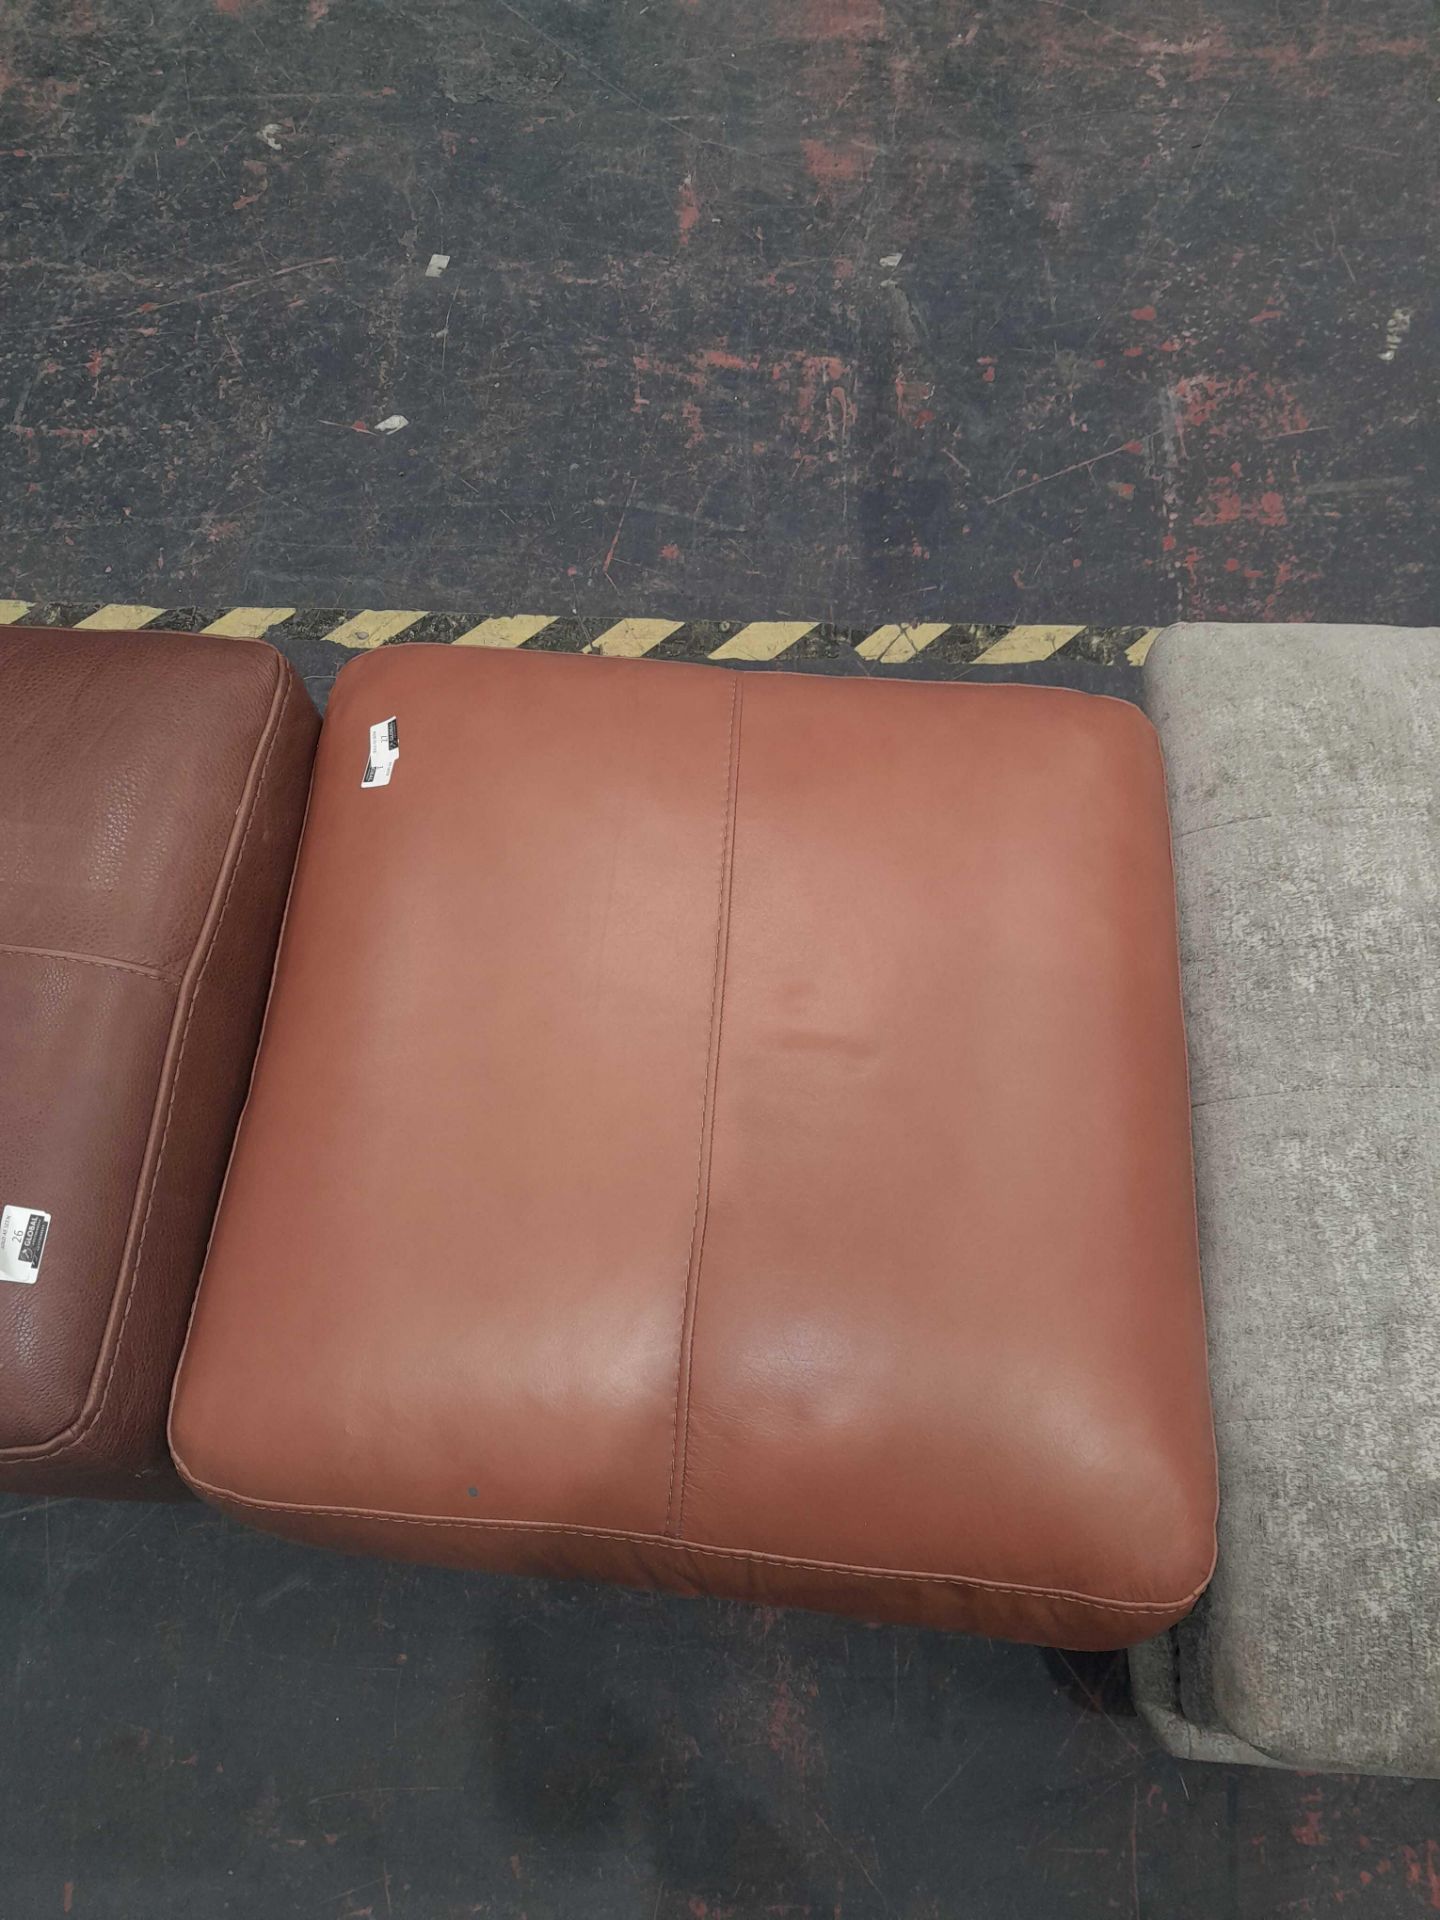 RRP £350 Ex Display Sofology Light Brown Leather Footstool - Image 2 of 2